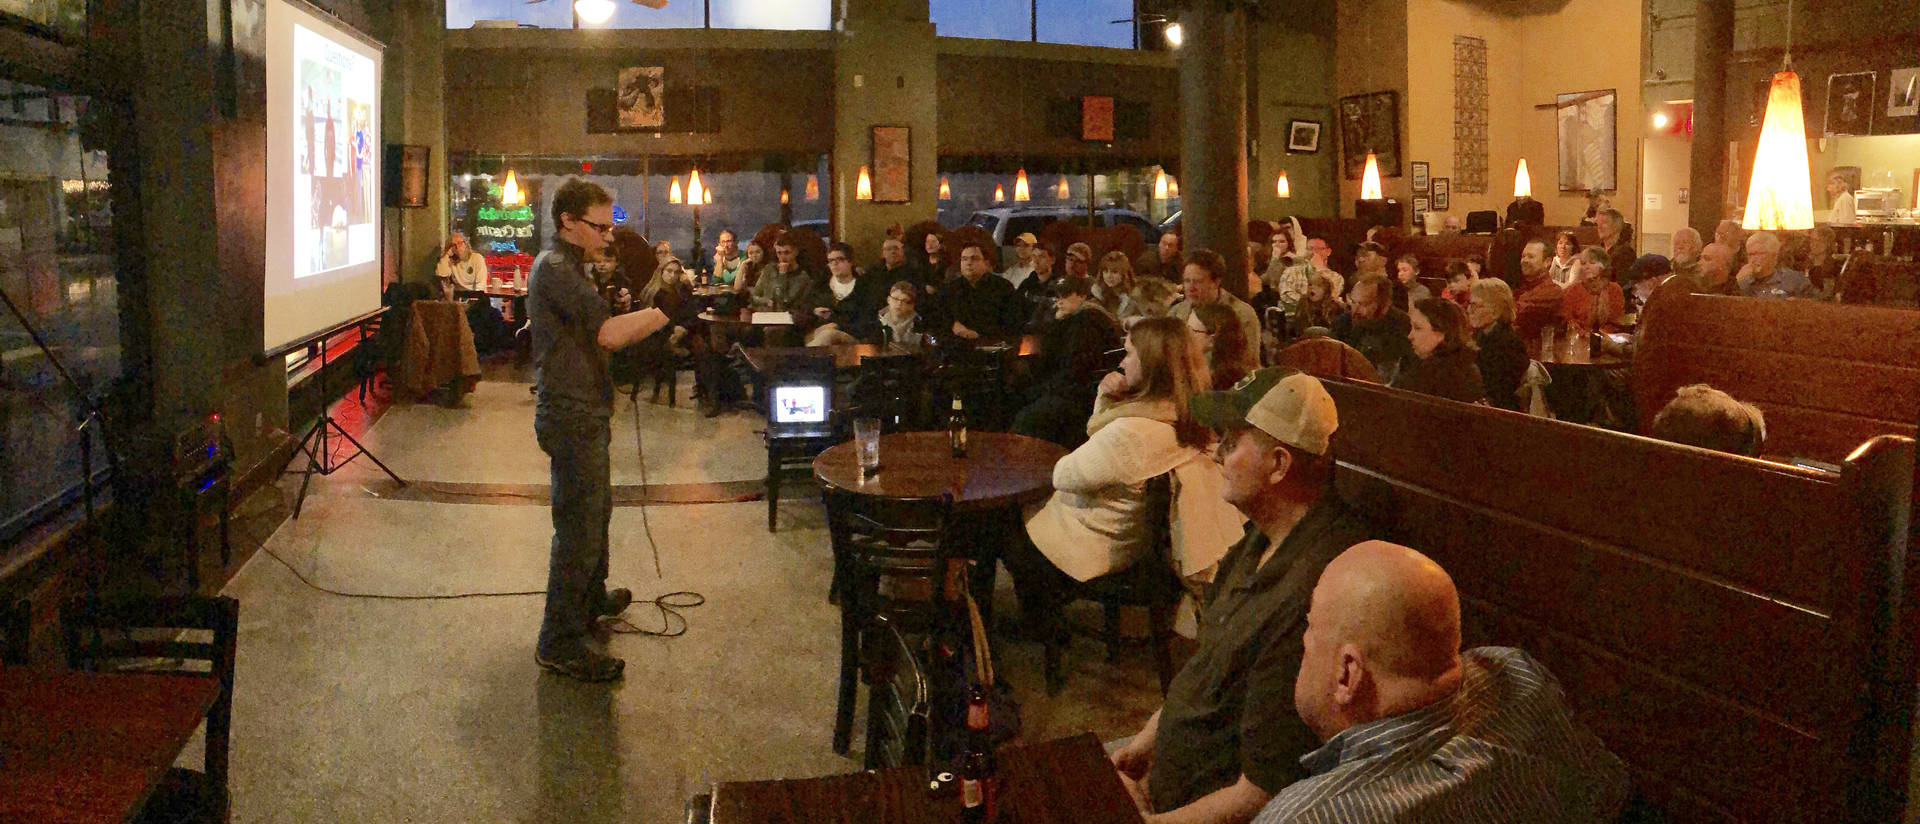 Ask a Scientist event at Acoustic Cafe in Eau Claire